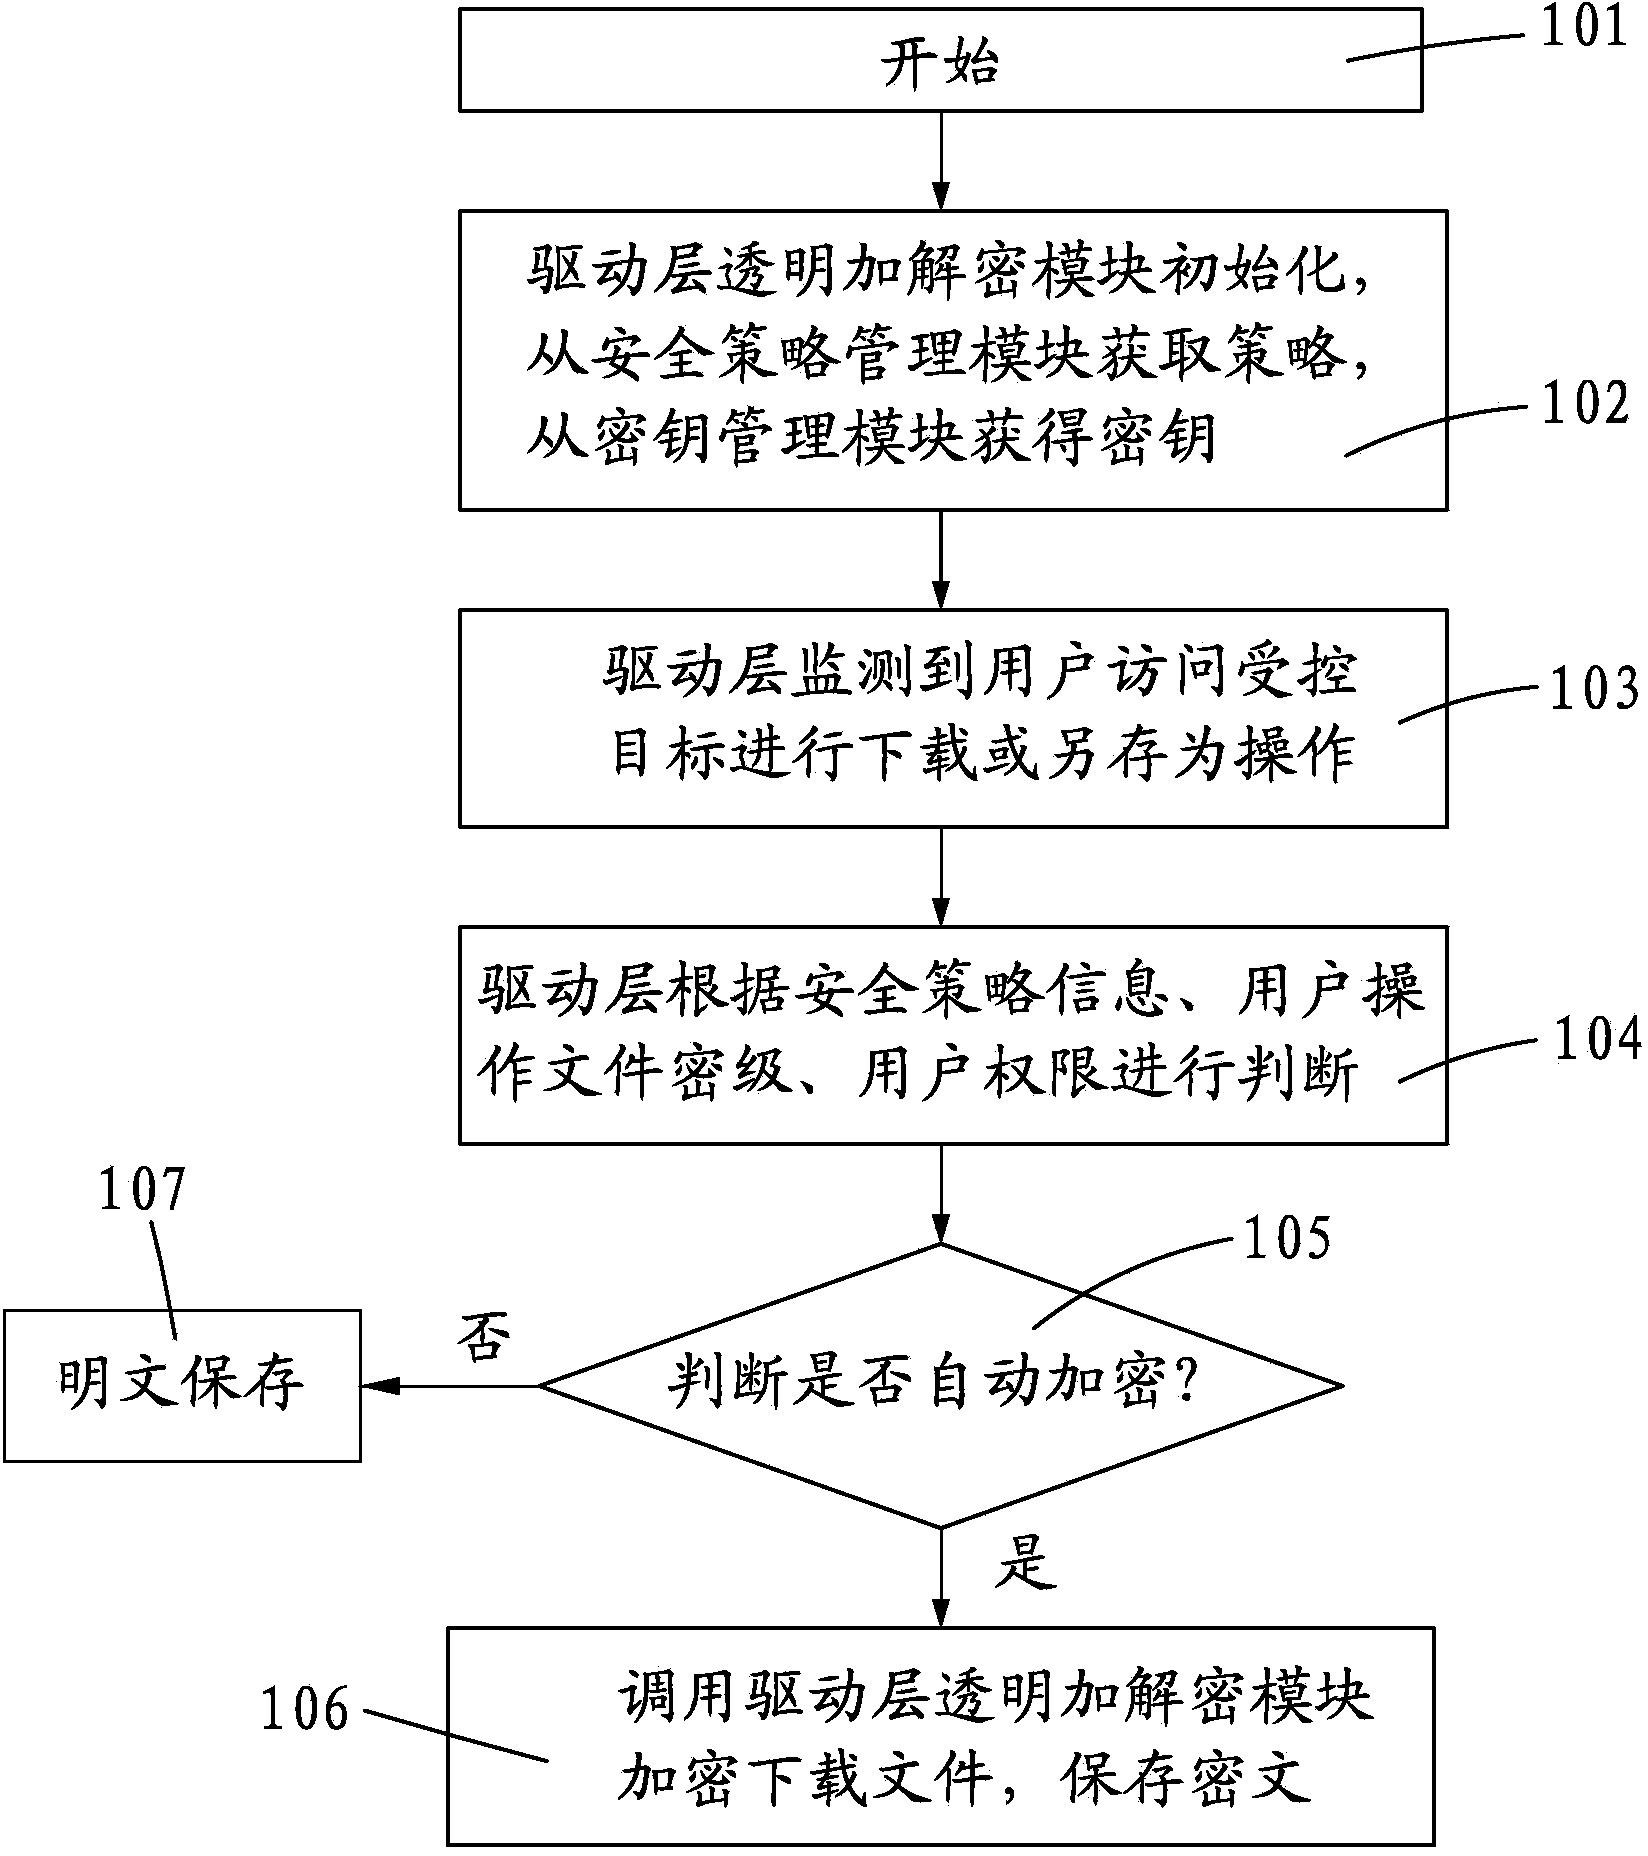 Electronic document safety management system and method